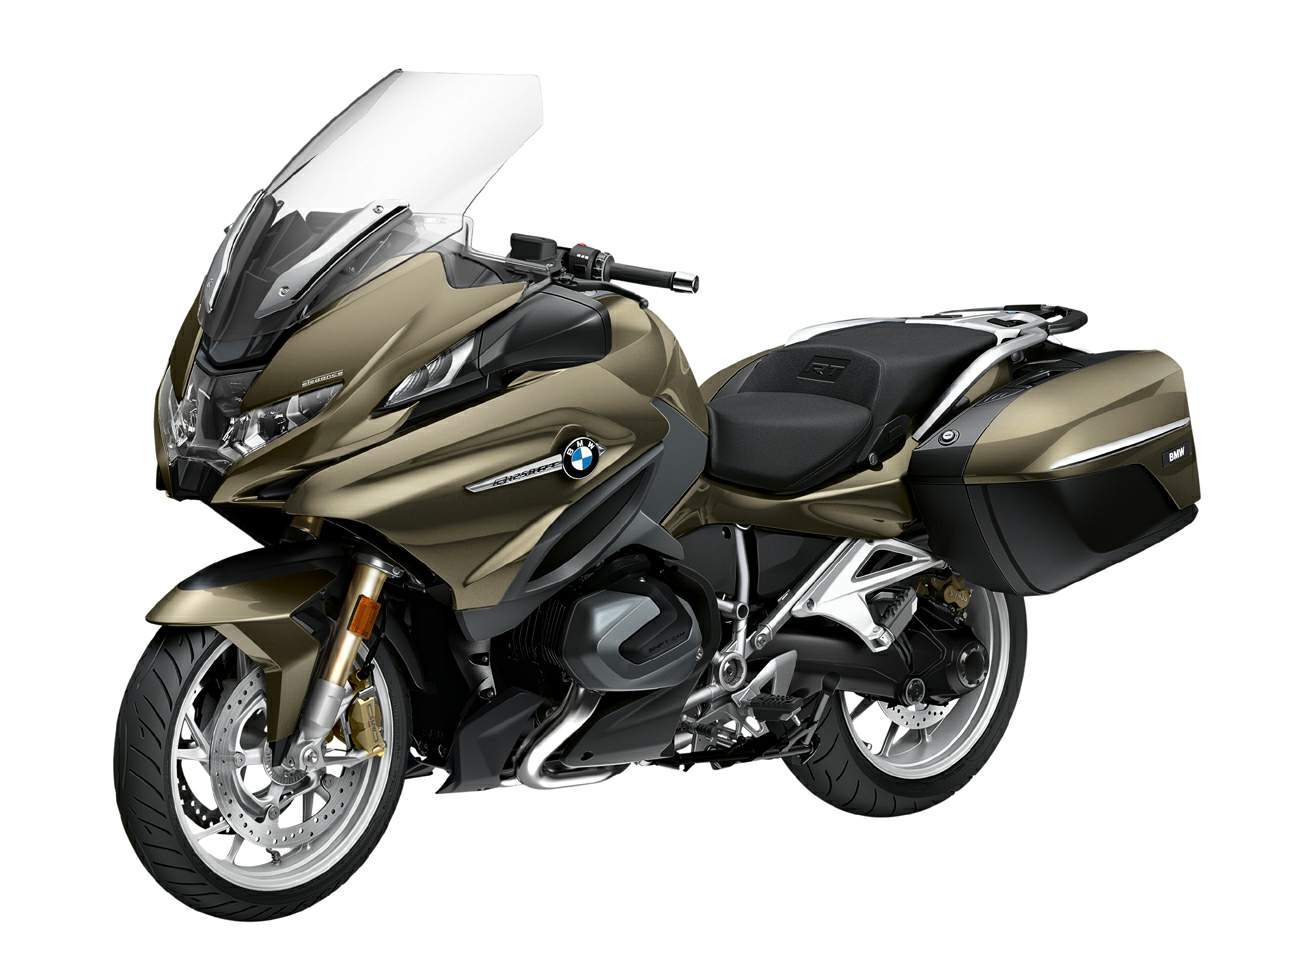 BMW R 1250RT technical specifications